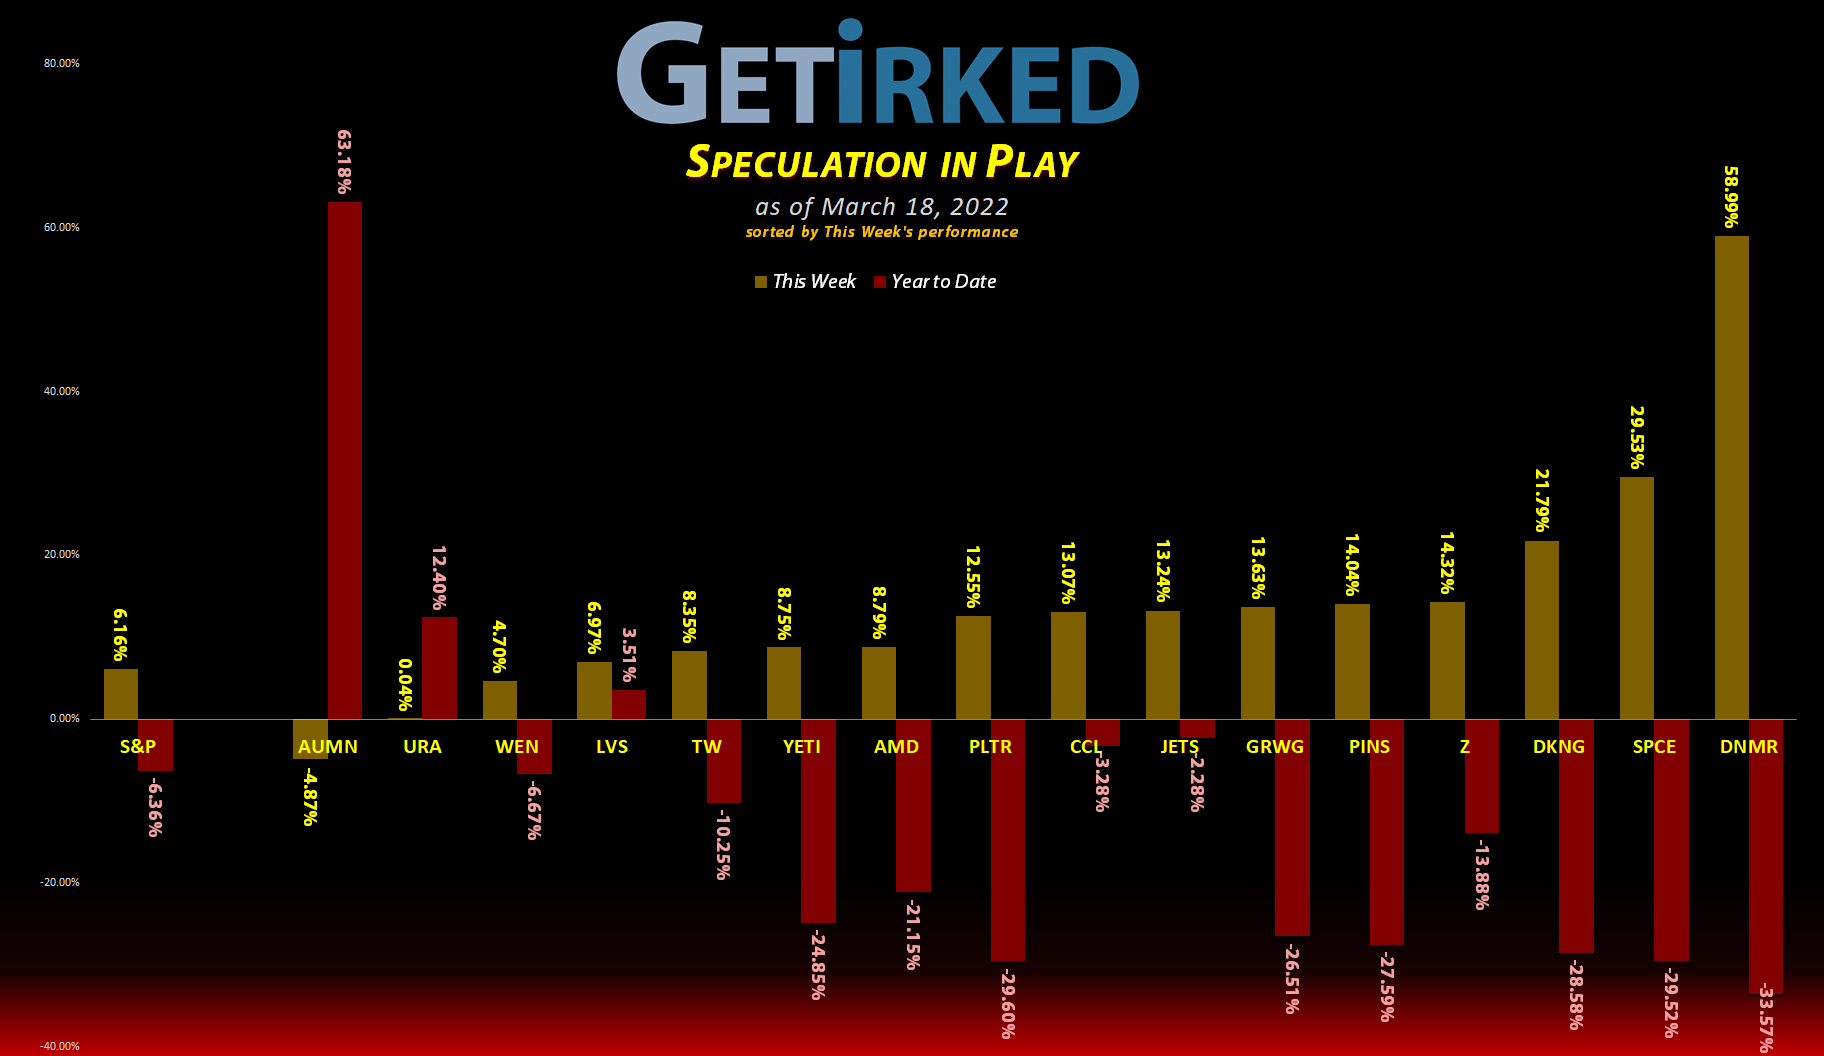 Get Irked's Speculation in Play - March 18, 2022